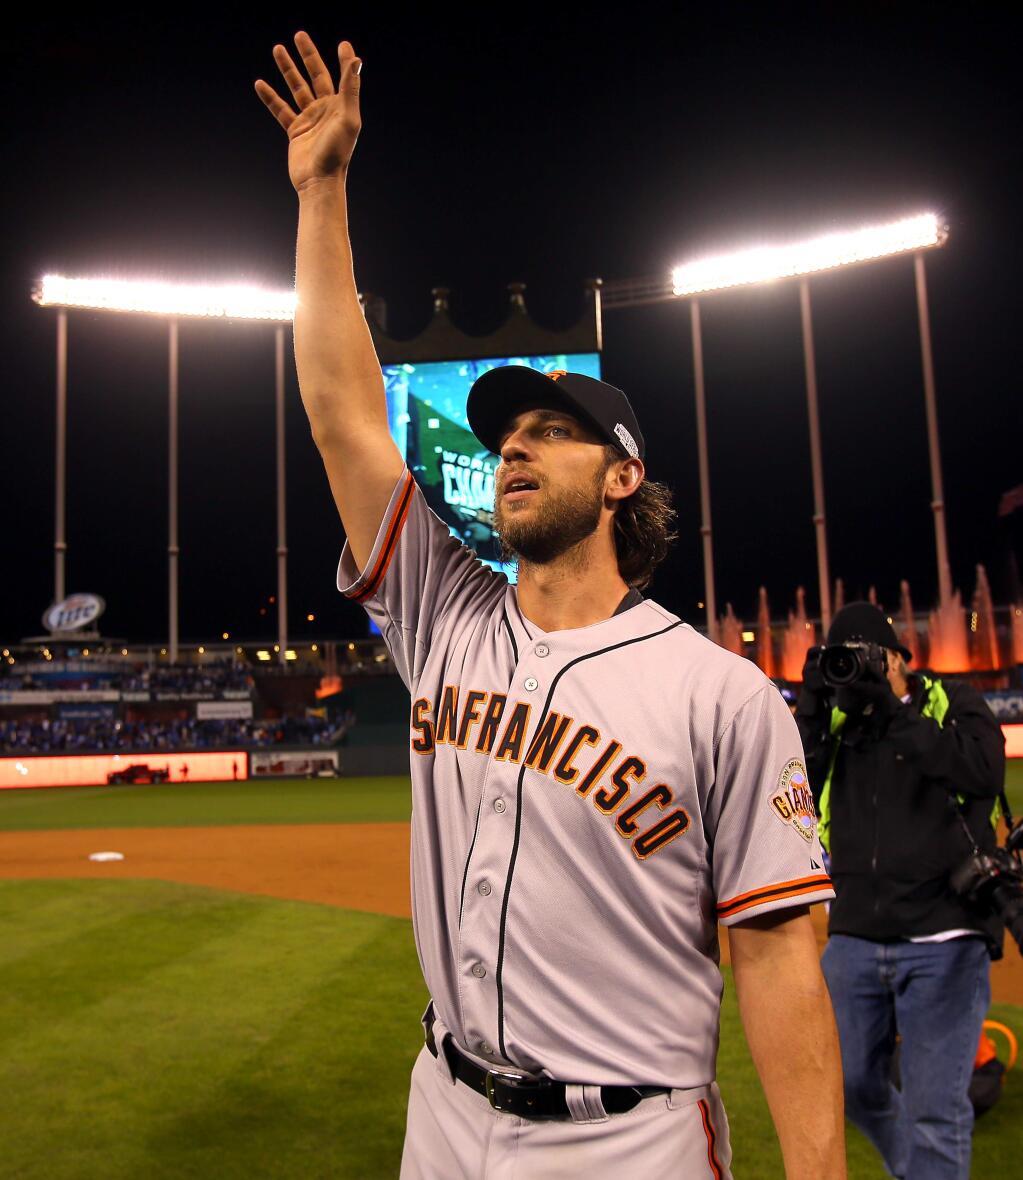 San Francisco Giants pitcher Madison Bumgarner waves to Giants fans after beating the Kansas City Royals in Game 7 of the World Series in Kansas City on Wednesday, Oct. 29, 2014. (Christopher Chung / The Press Democrat)